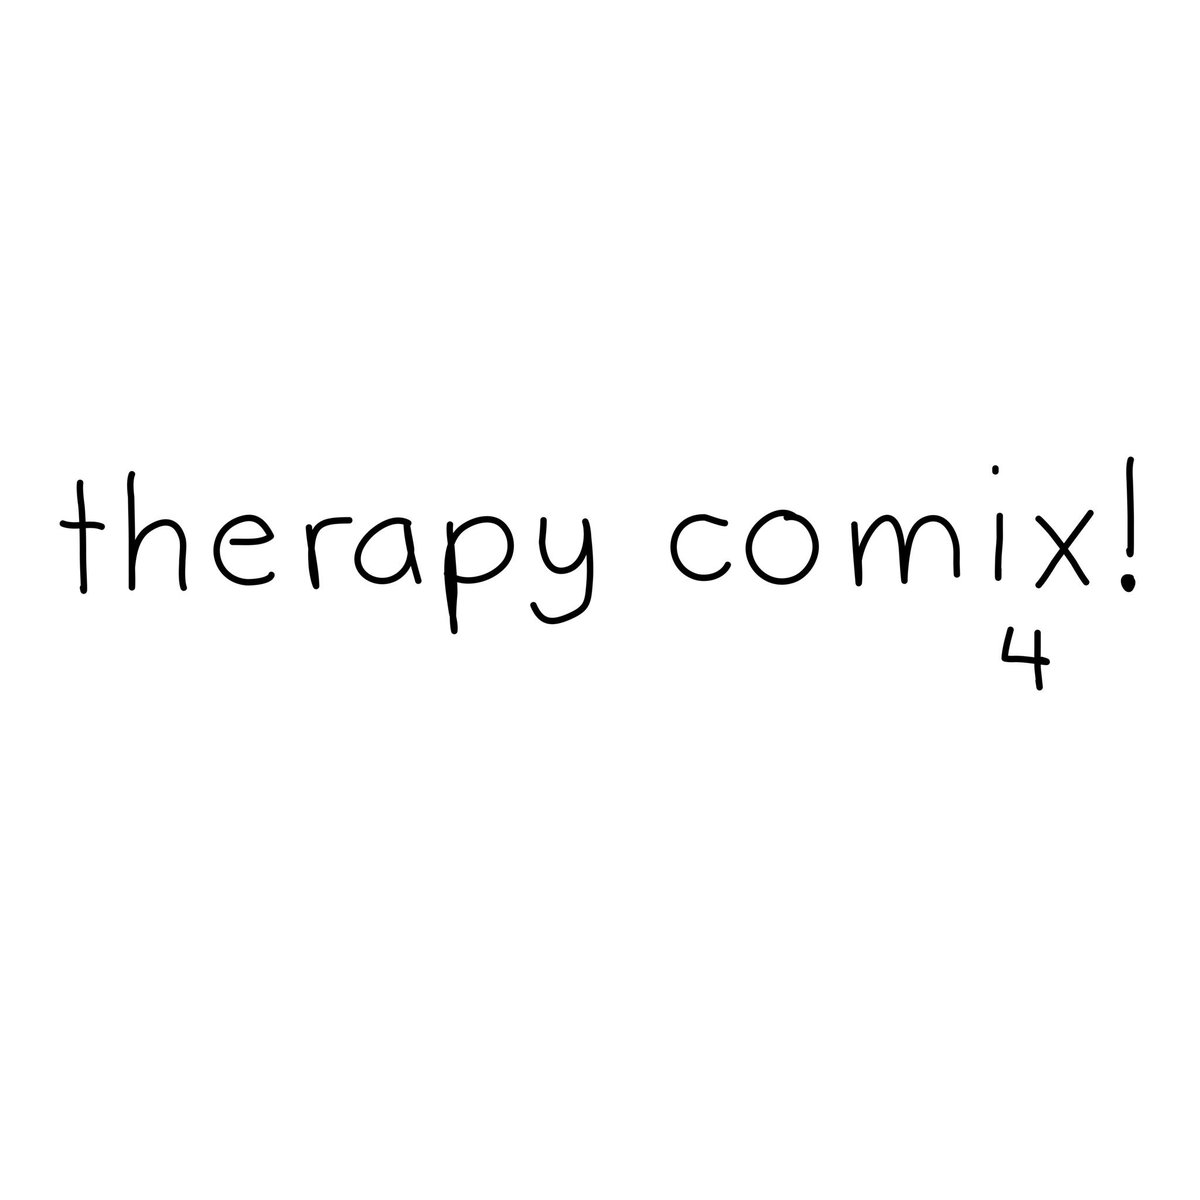 comic : therapy 4 